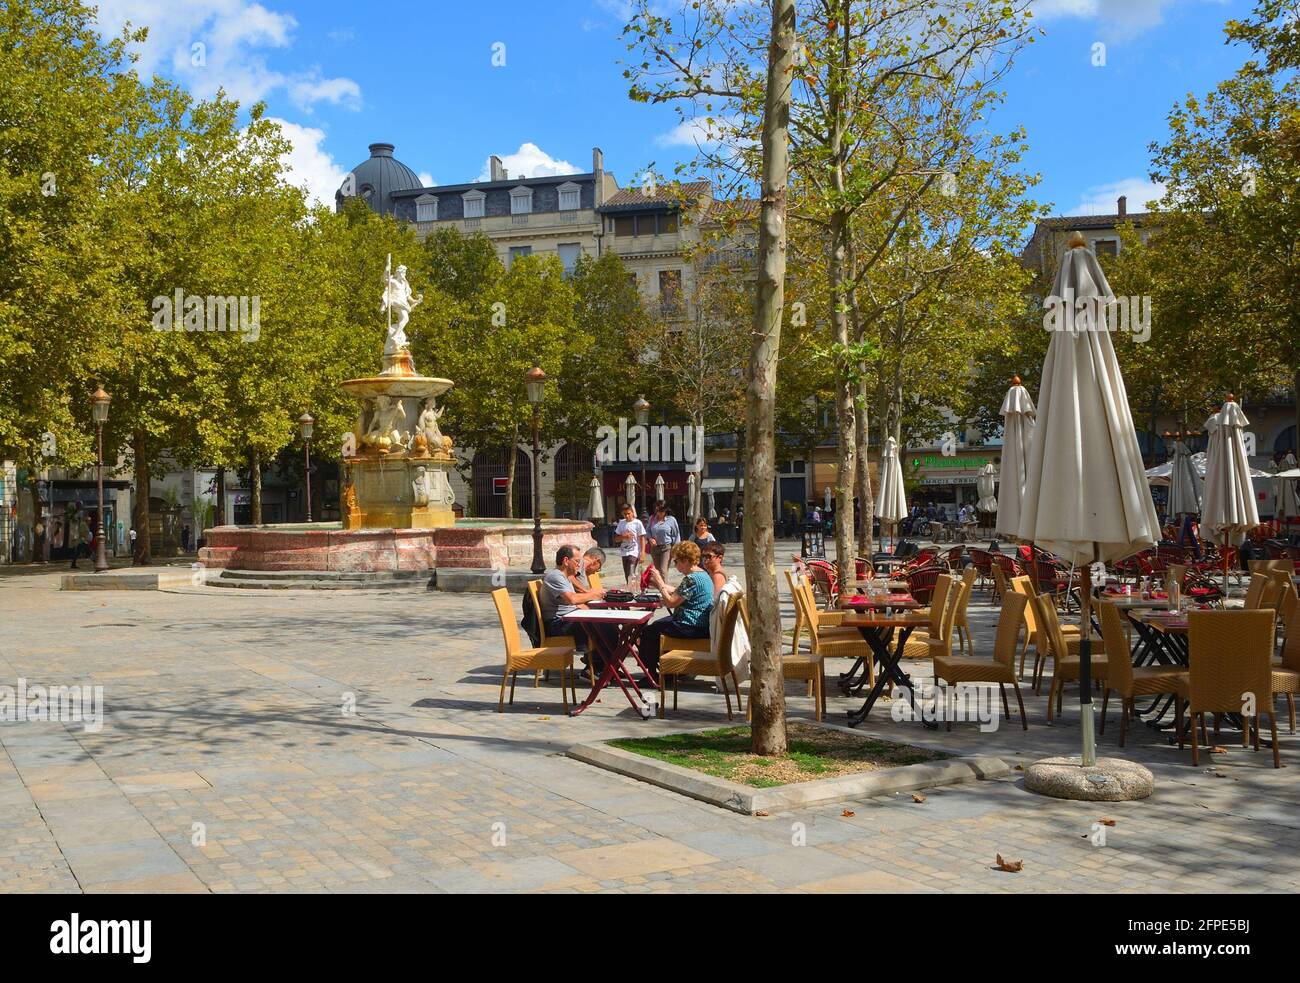 Cafe and monument in the town square at Carcassonne France. Stock Photo